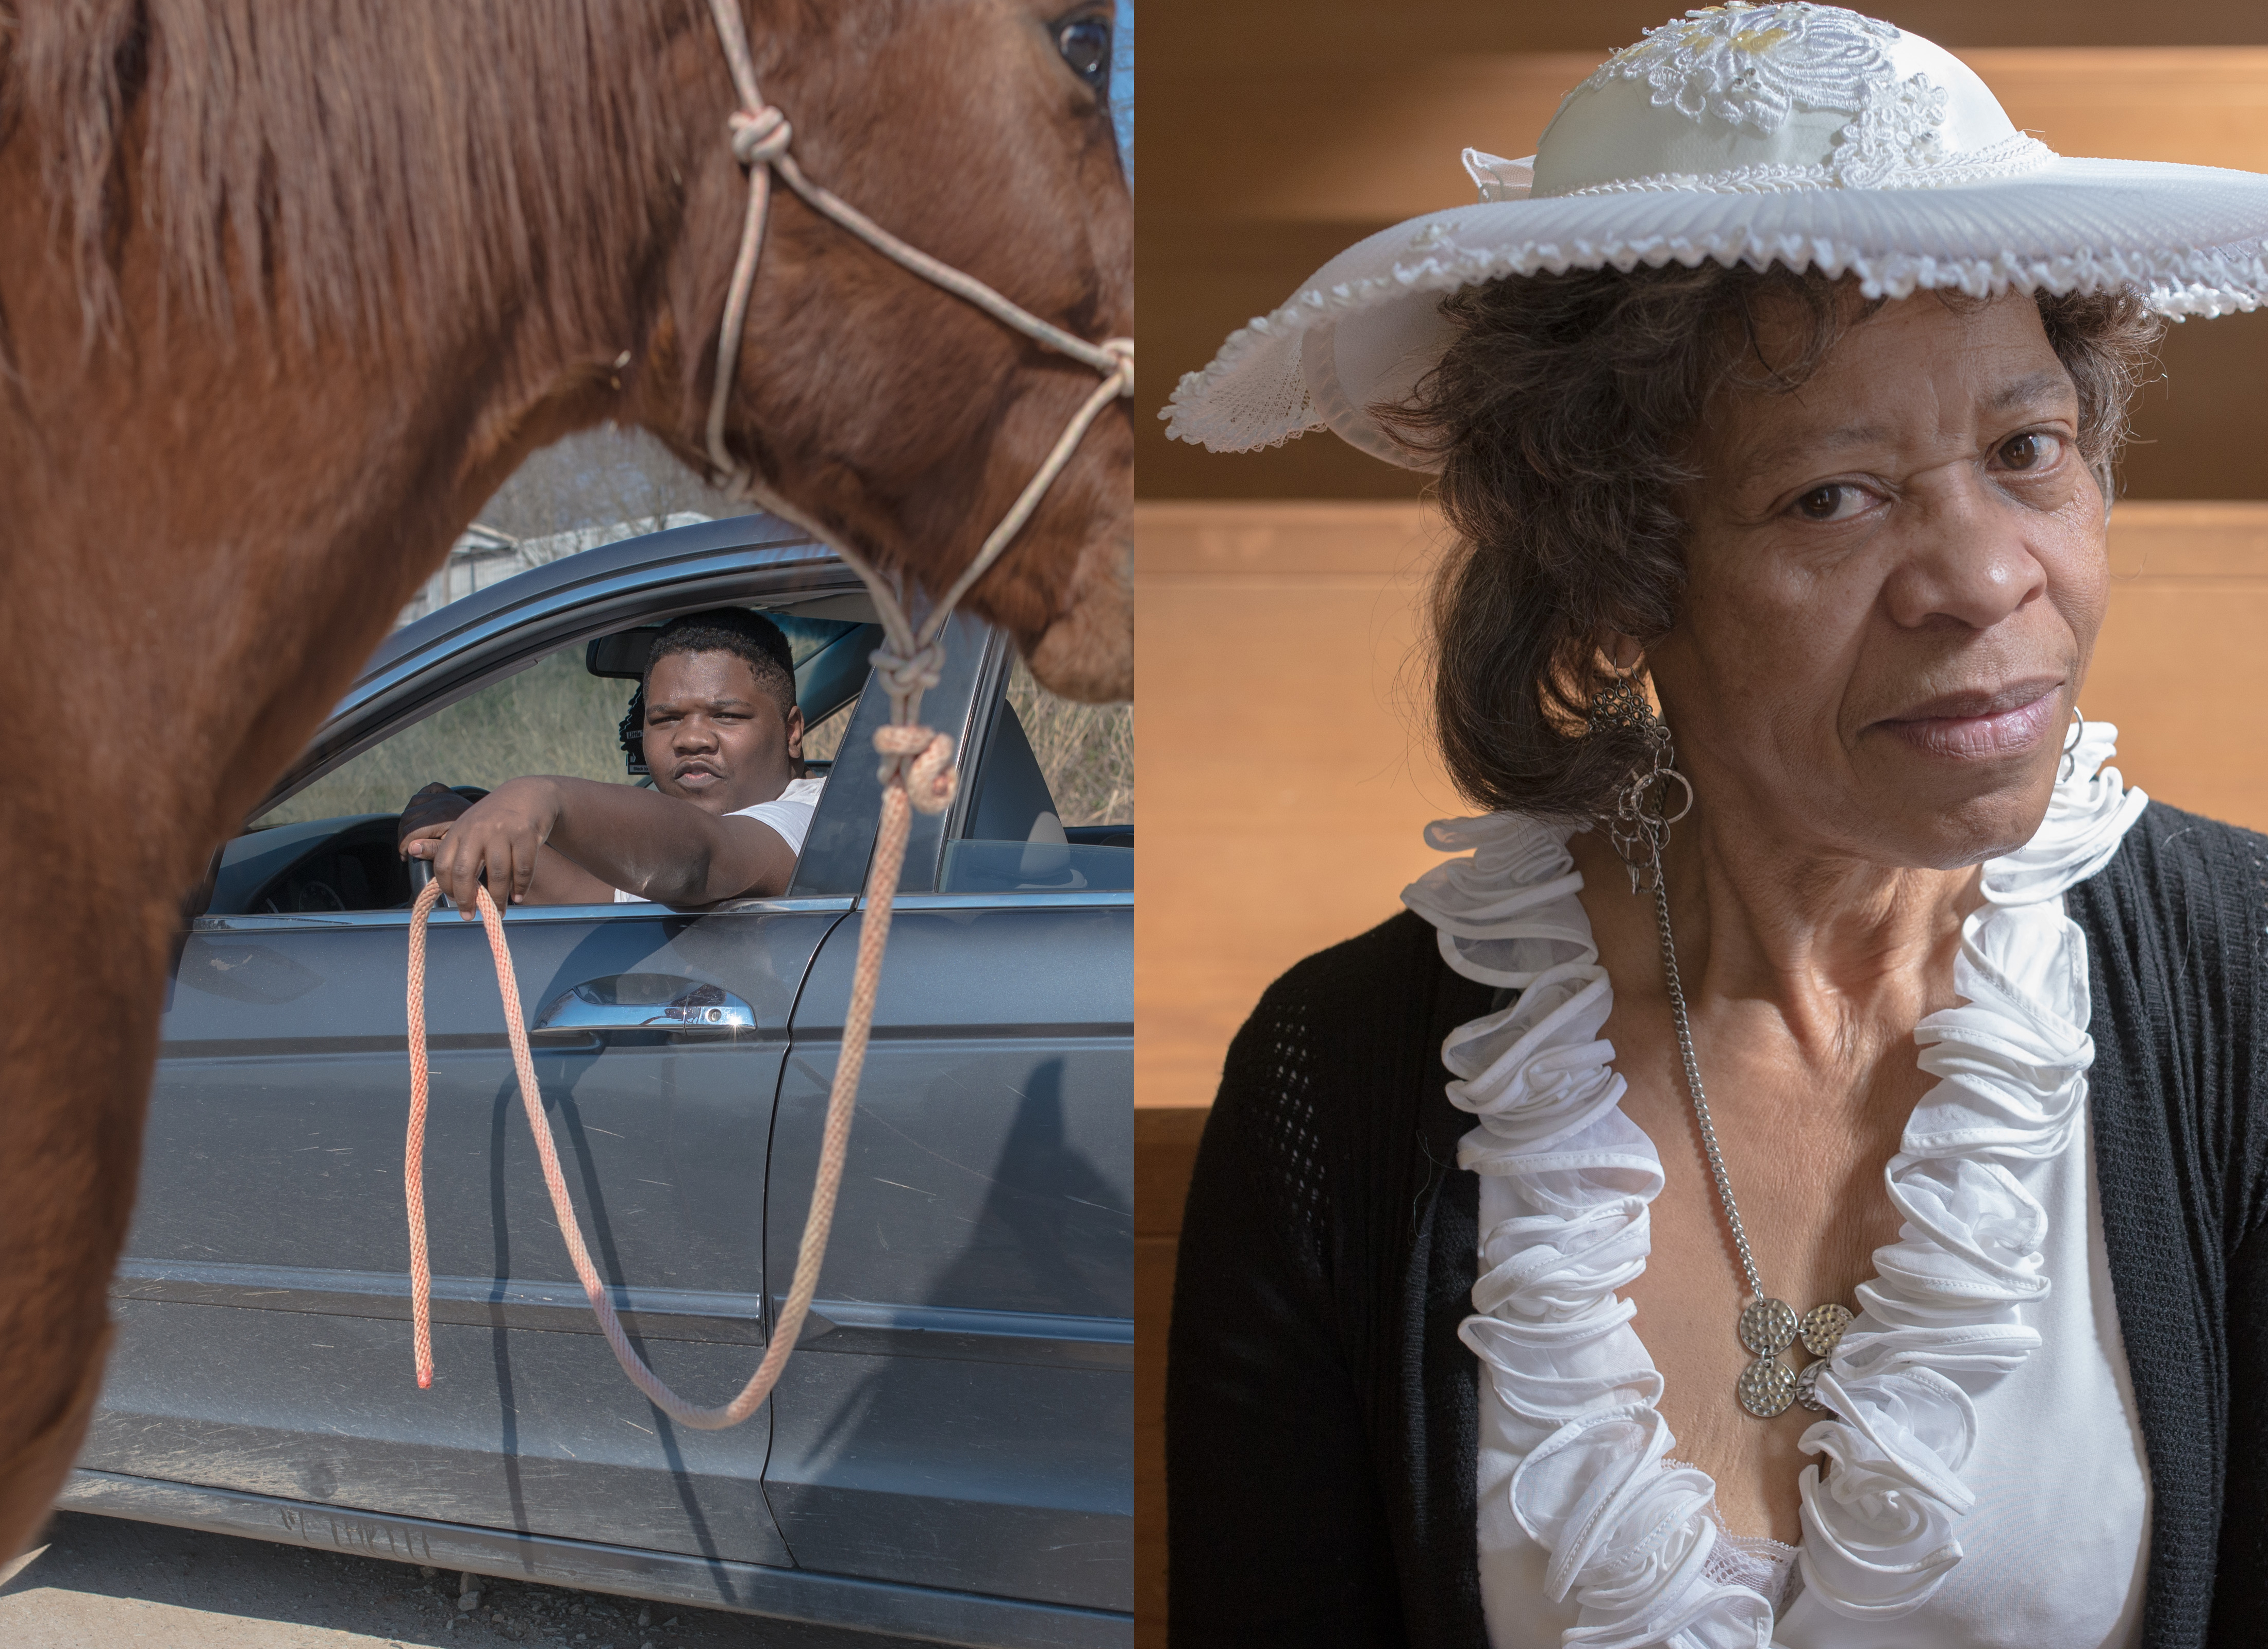 Two photos are next to each other. One is of a man in a car. He is seen underneath the neck of a brown horse as he holds the reigns from the open car window. The second is an older woman in a white hat and matching shirt.